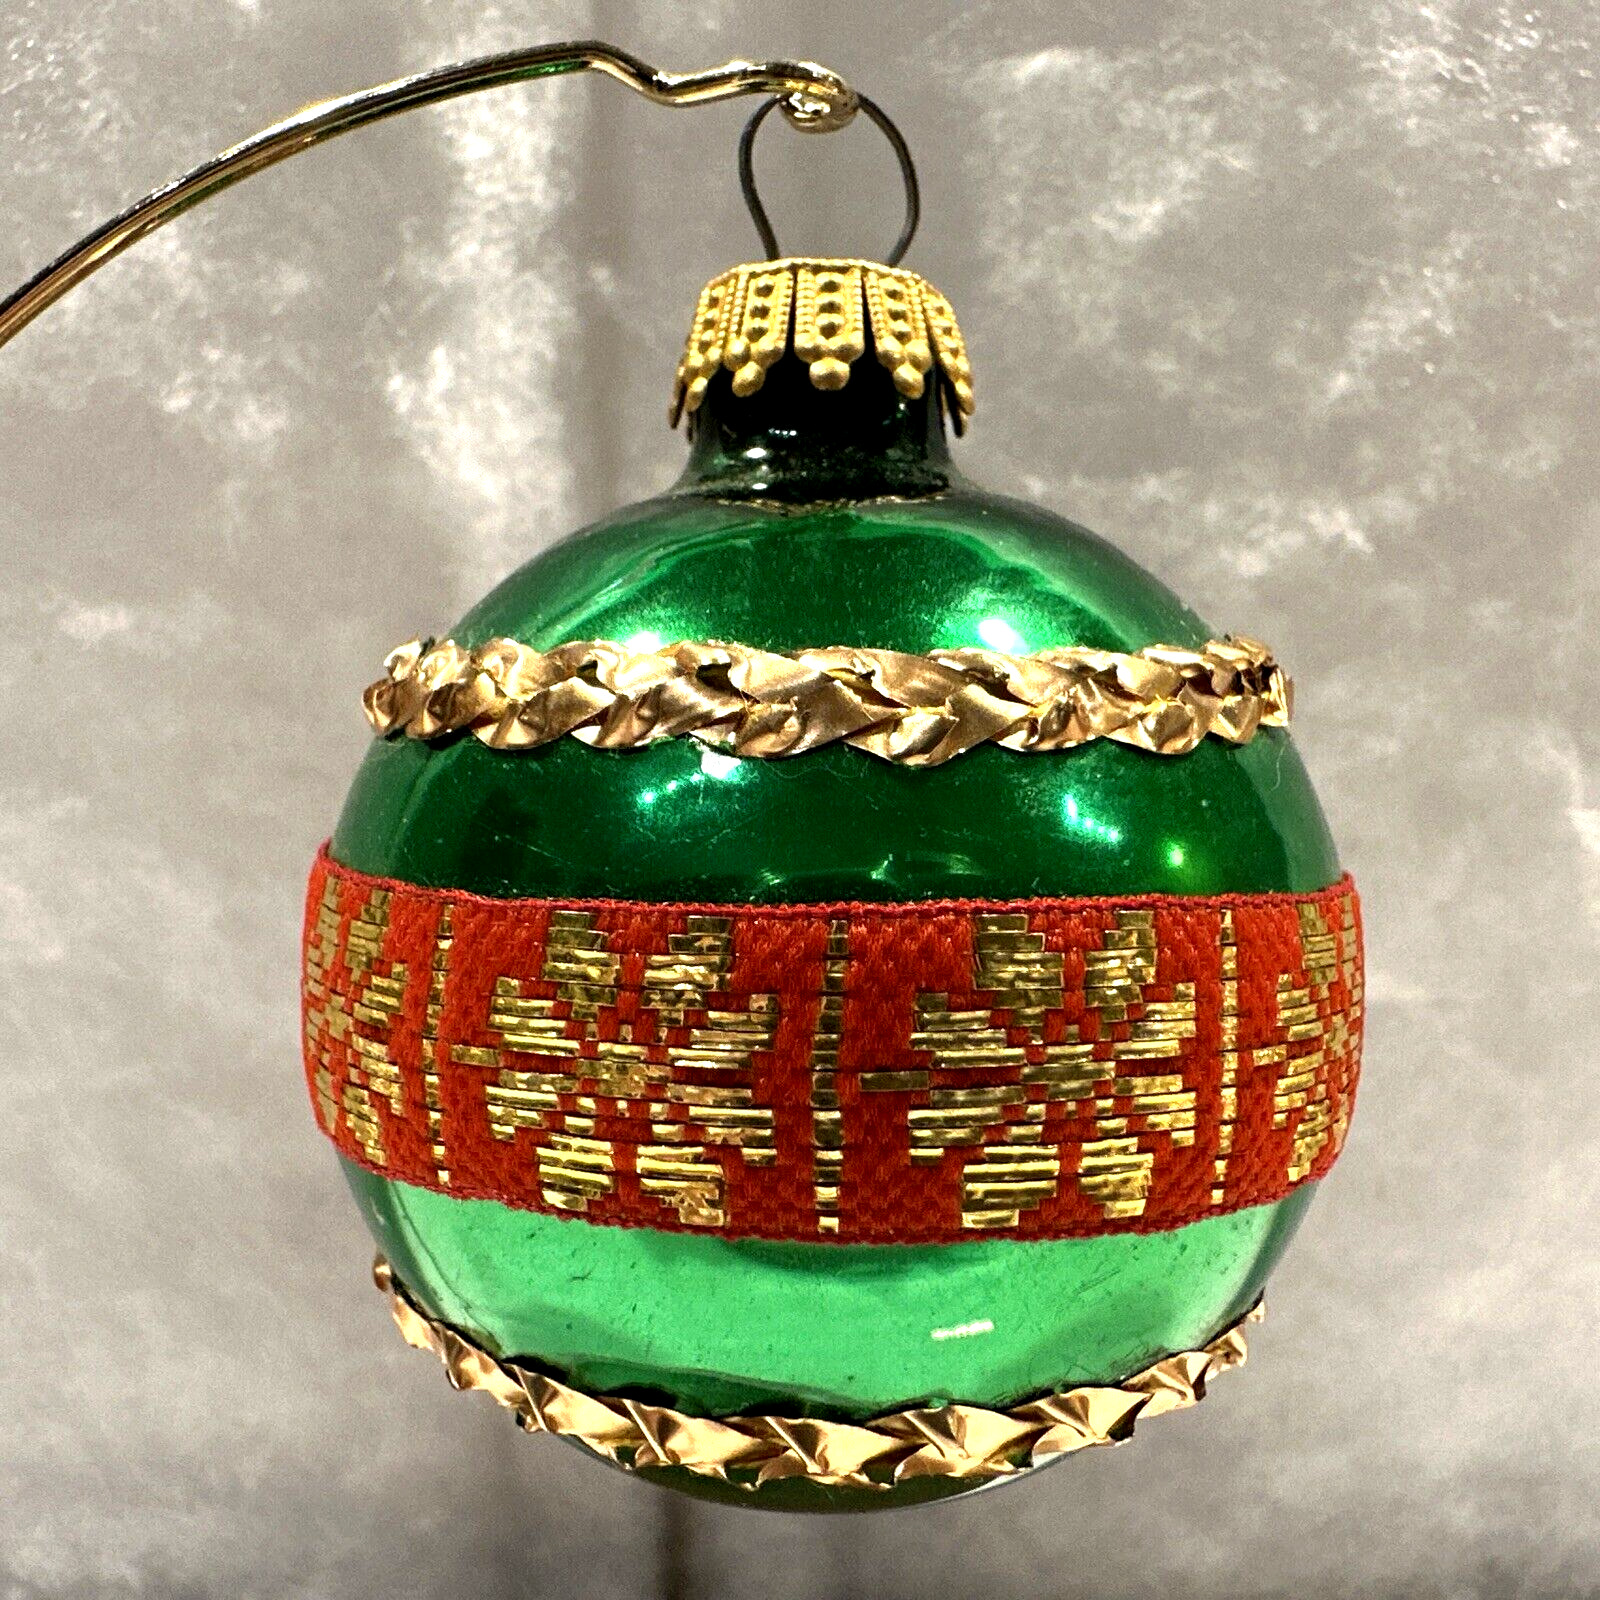 Vintage Mercury Glass Christmas Ornament 2.25” Green With Gold, Red West Germany